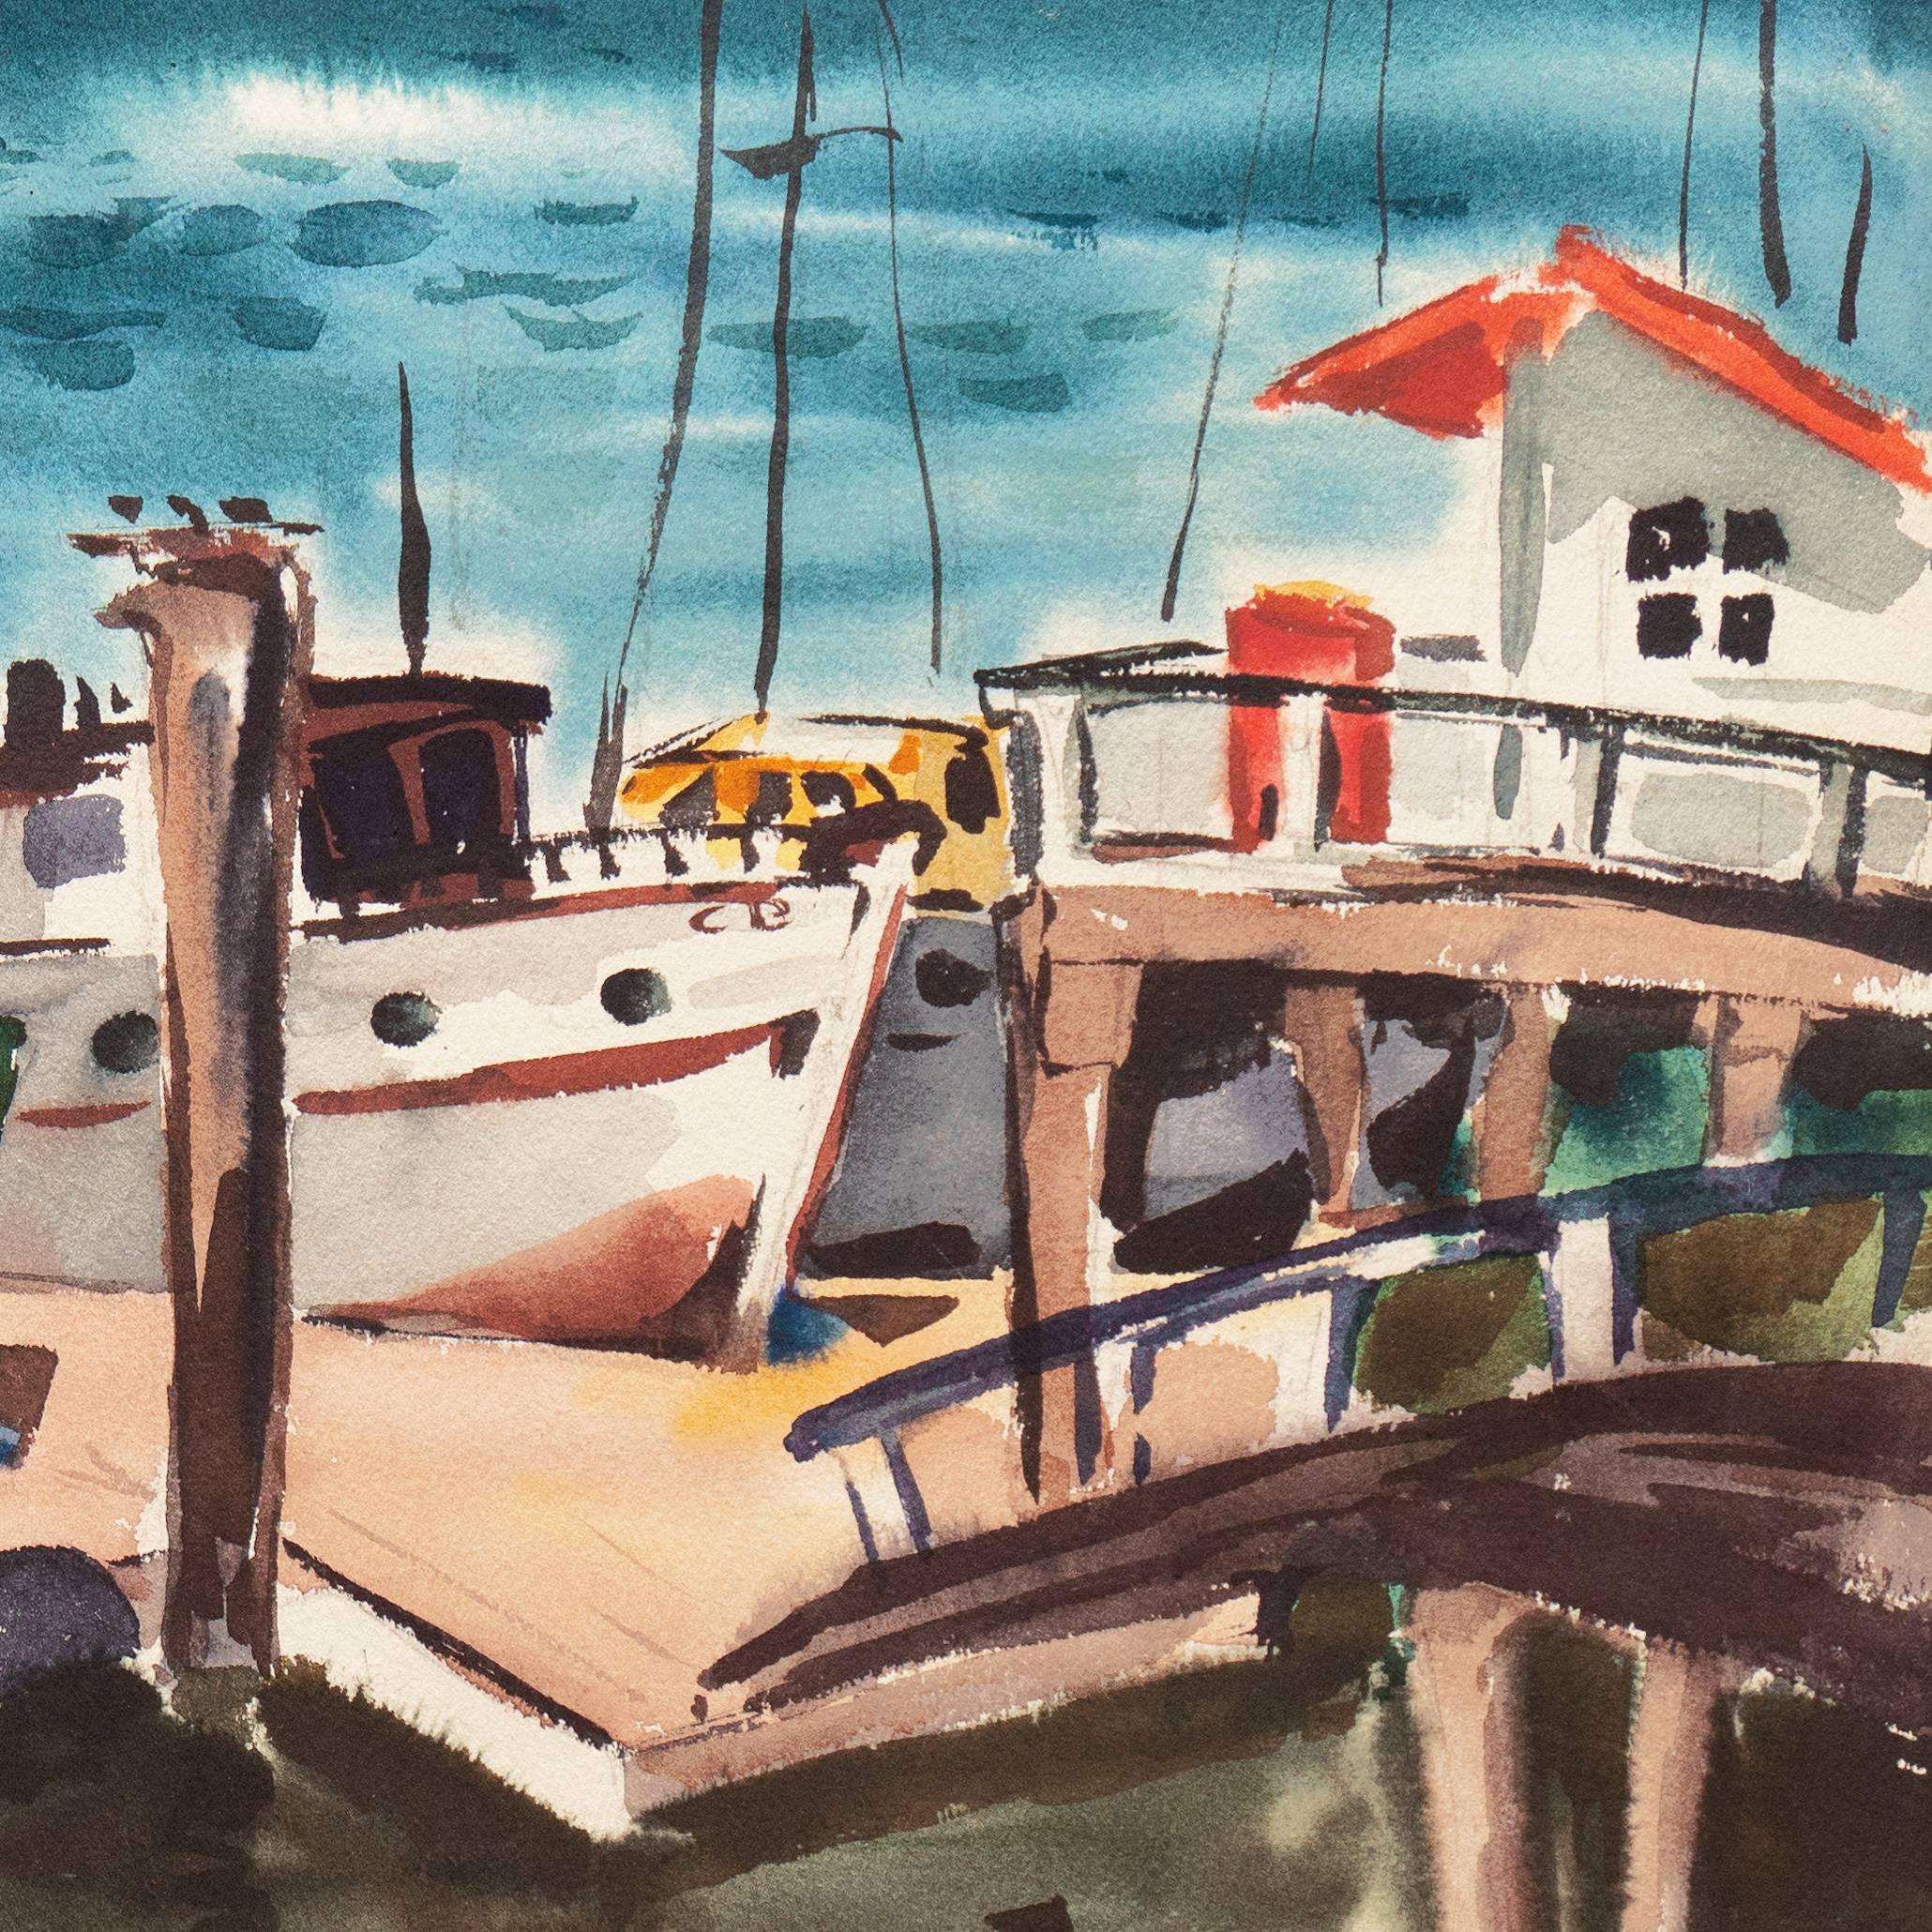 A moody Monterey seascape showing a view of an old dock from a waterfront bar popular with local fishermen during the 1950's through the 1970's. Painted by this notable California Modernist who exhibited widely and with success from the 1930's